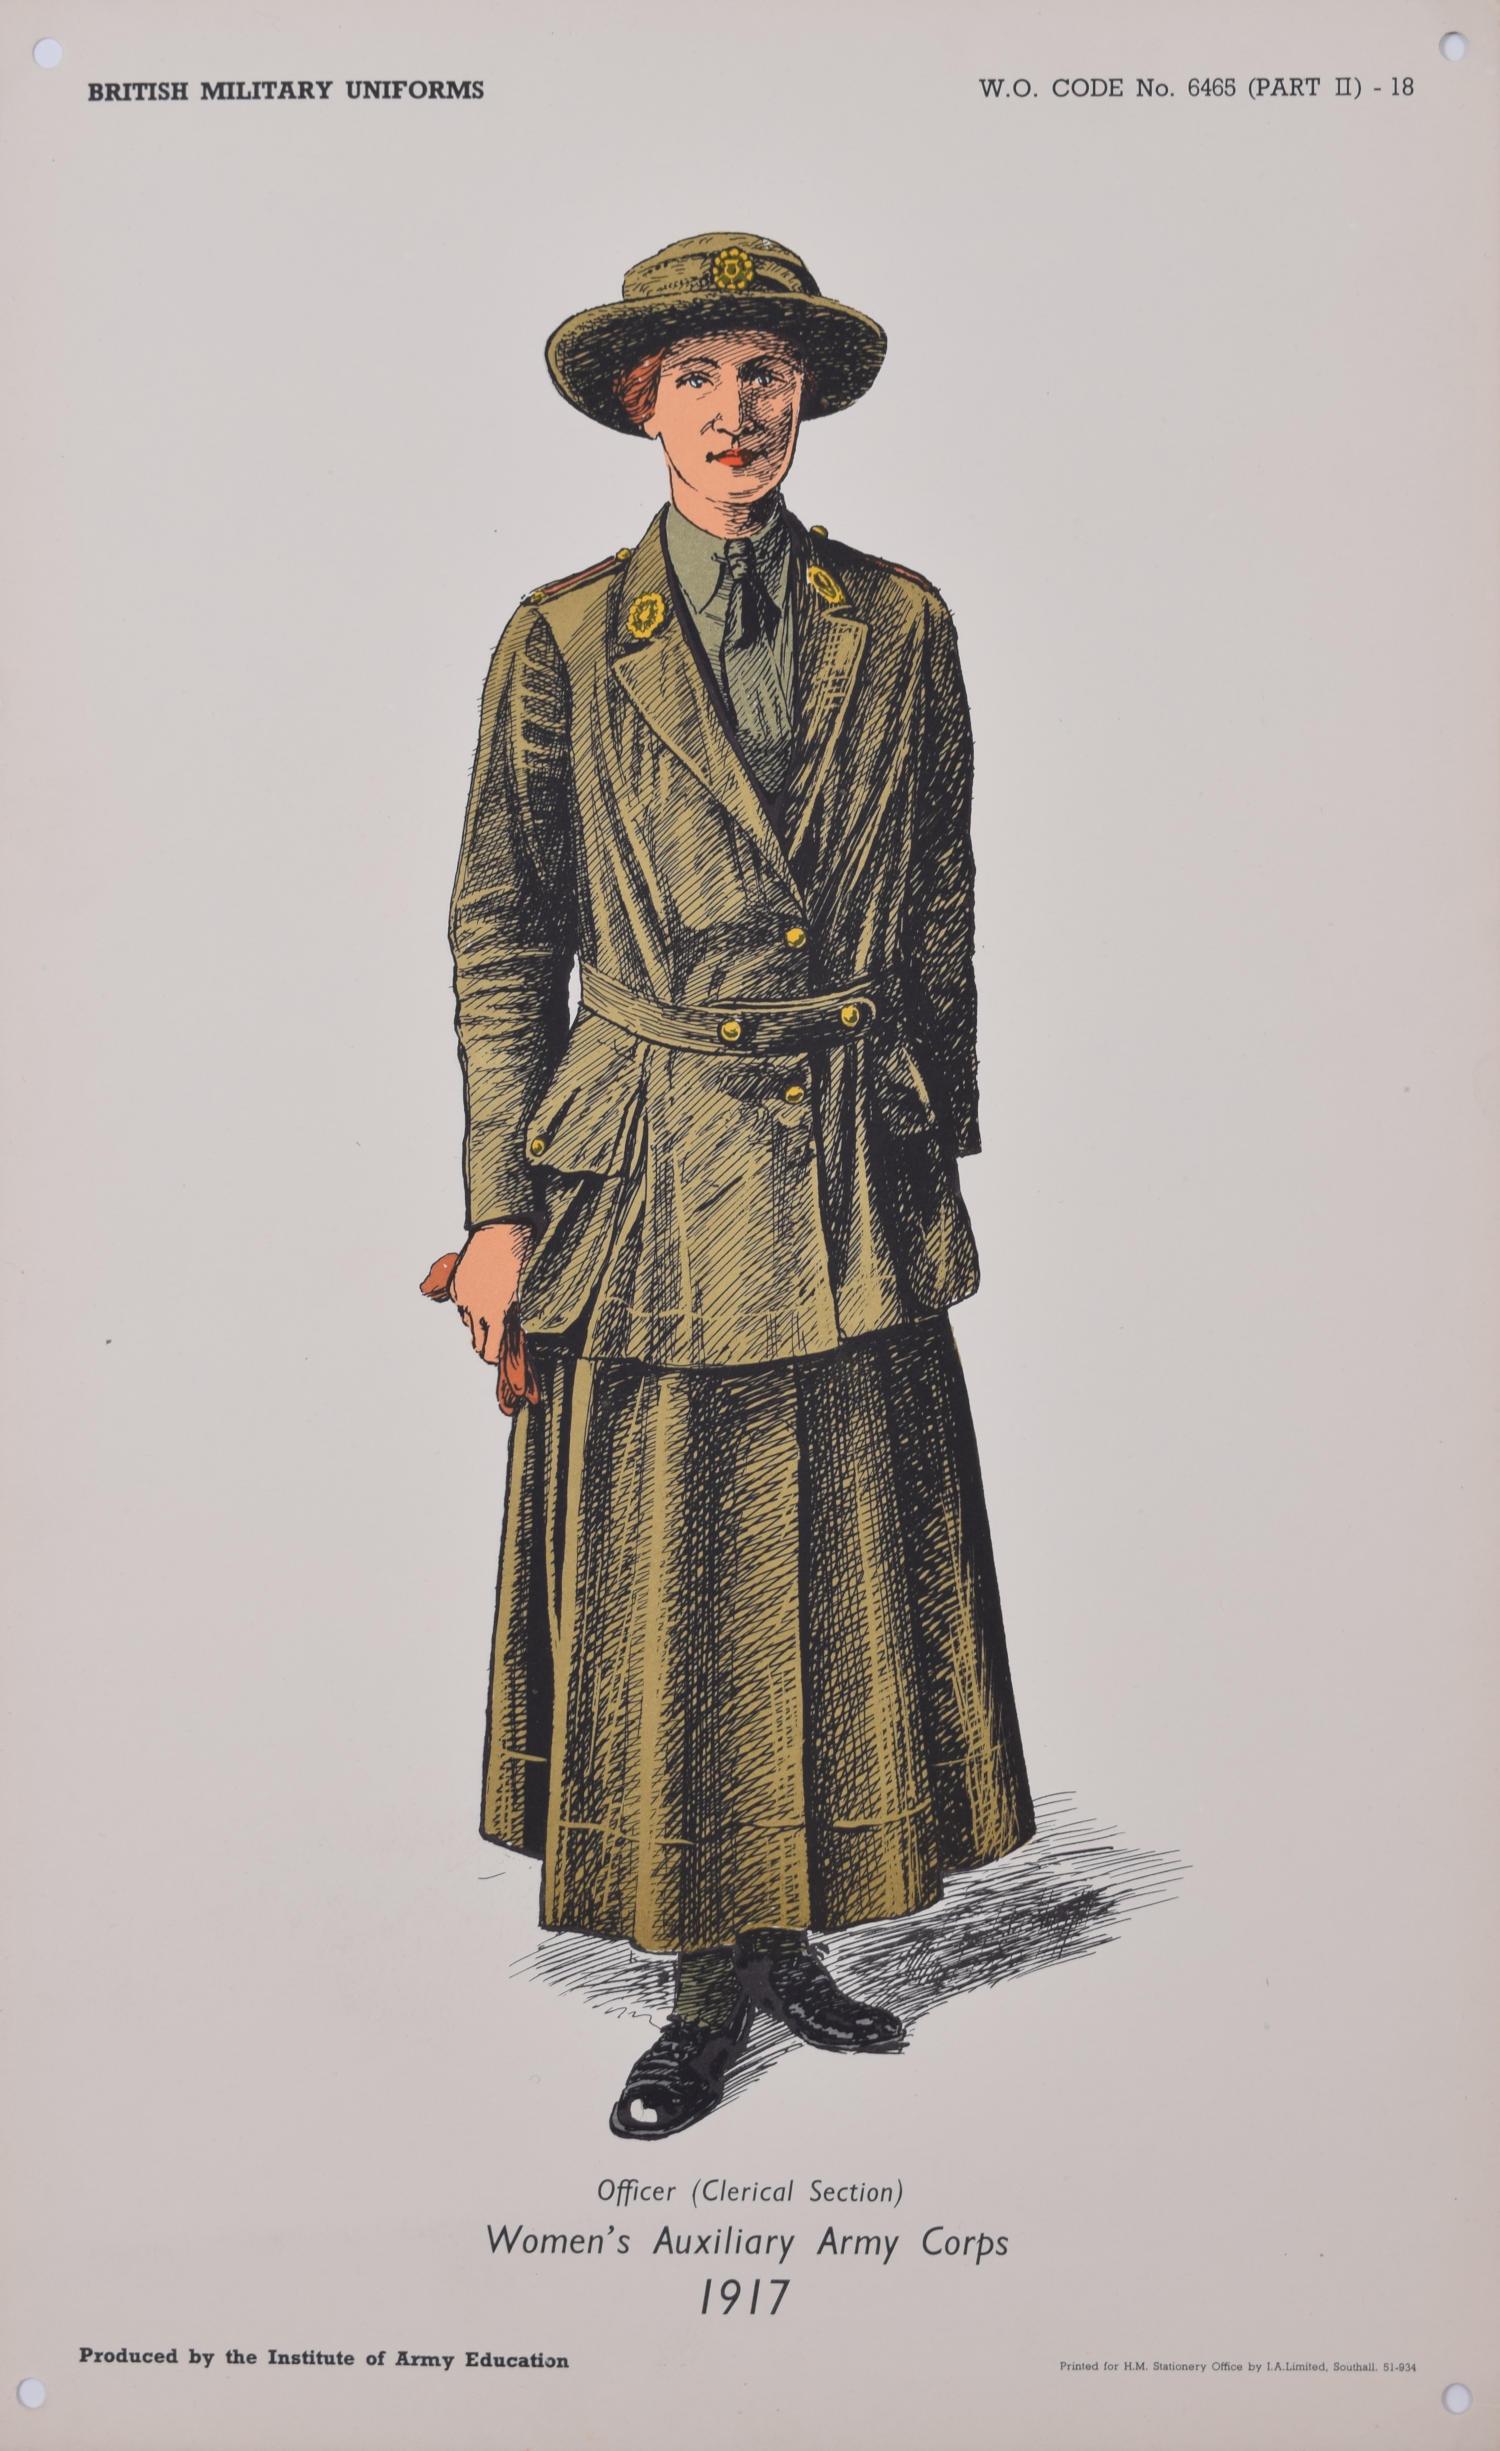 Unknown Portrait Print - Women's Auxiliary Army Corps Institute of Army Education WW1 uniform lithograph